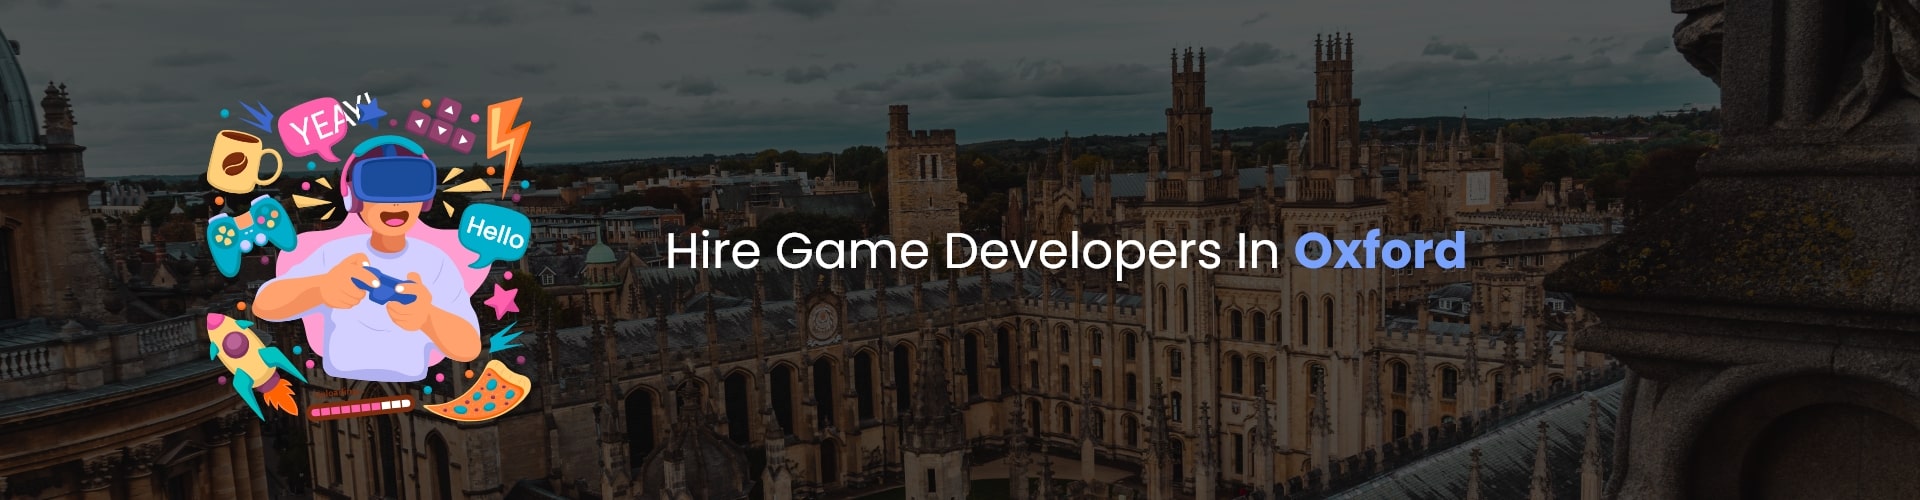 hire game developers in oxford